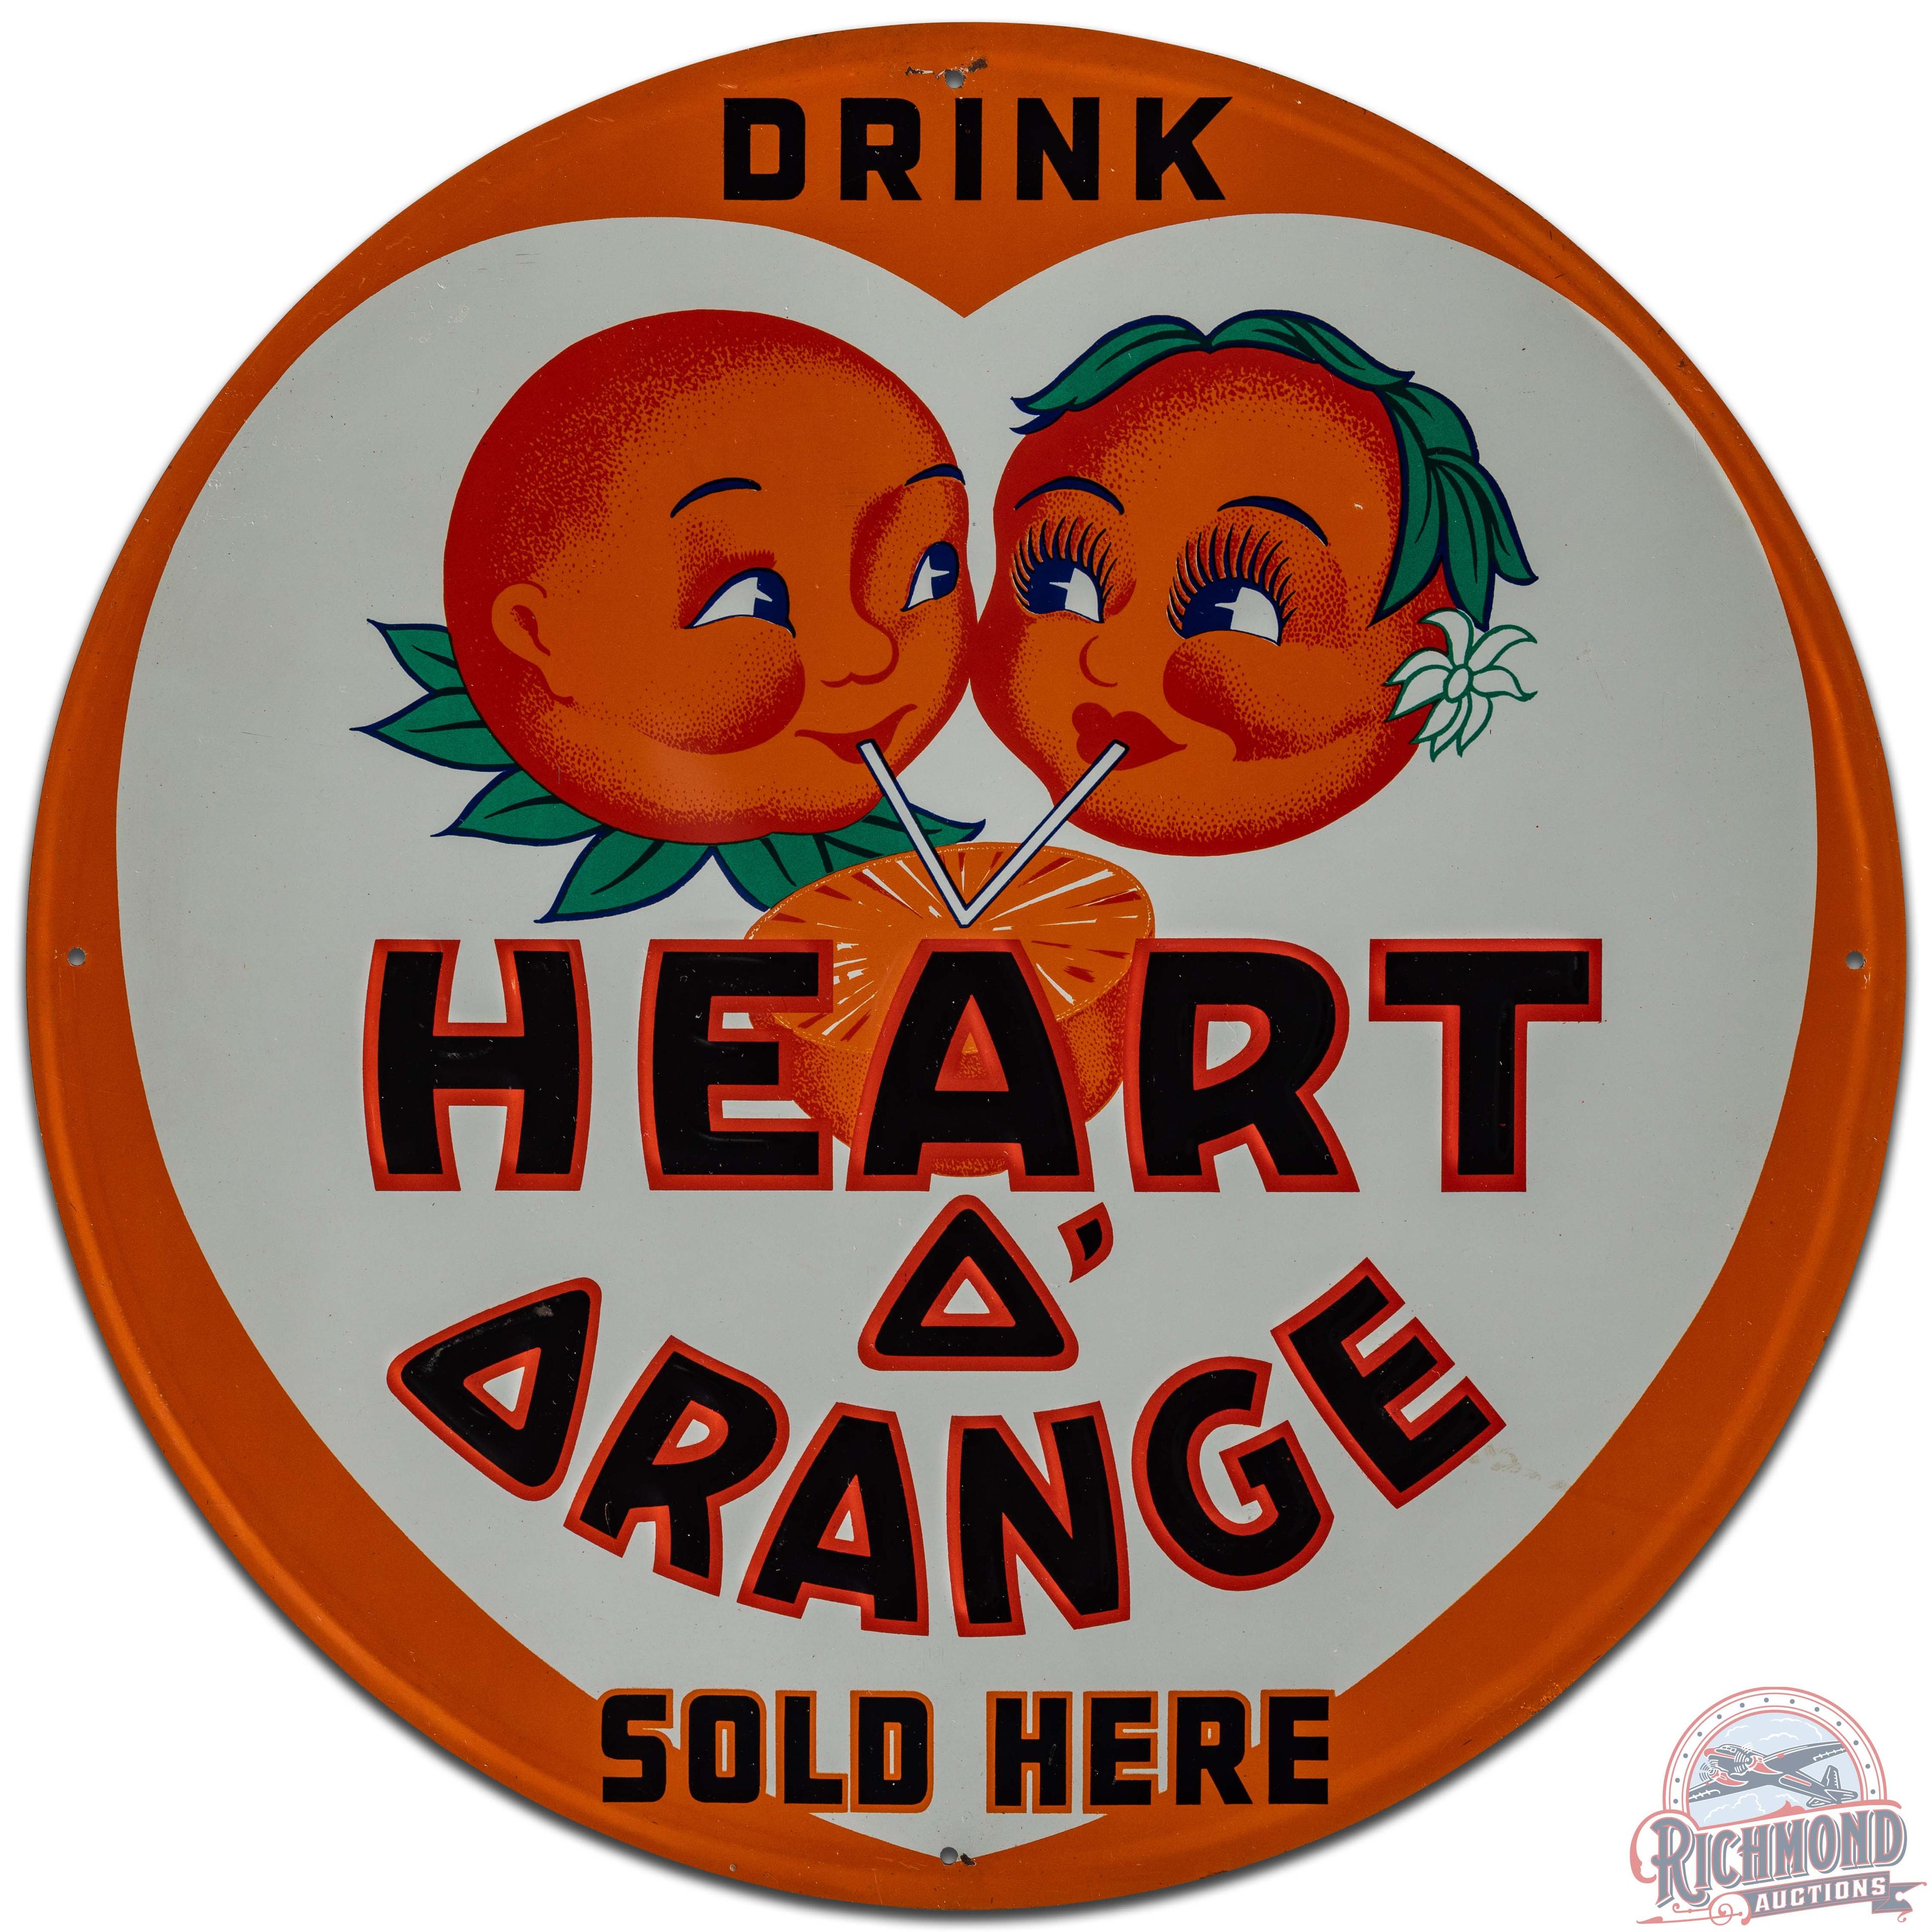 Drink Heart O' Orange "Sold Here' Emb. SS Tin Sign